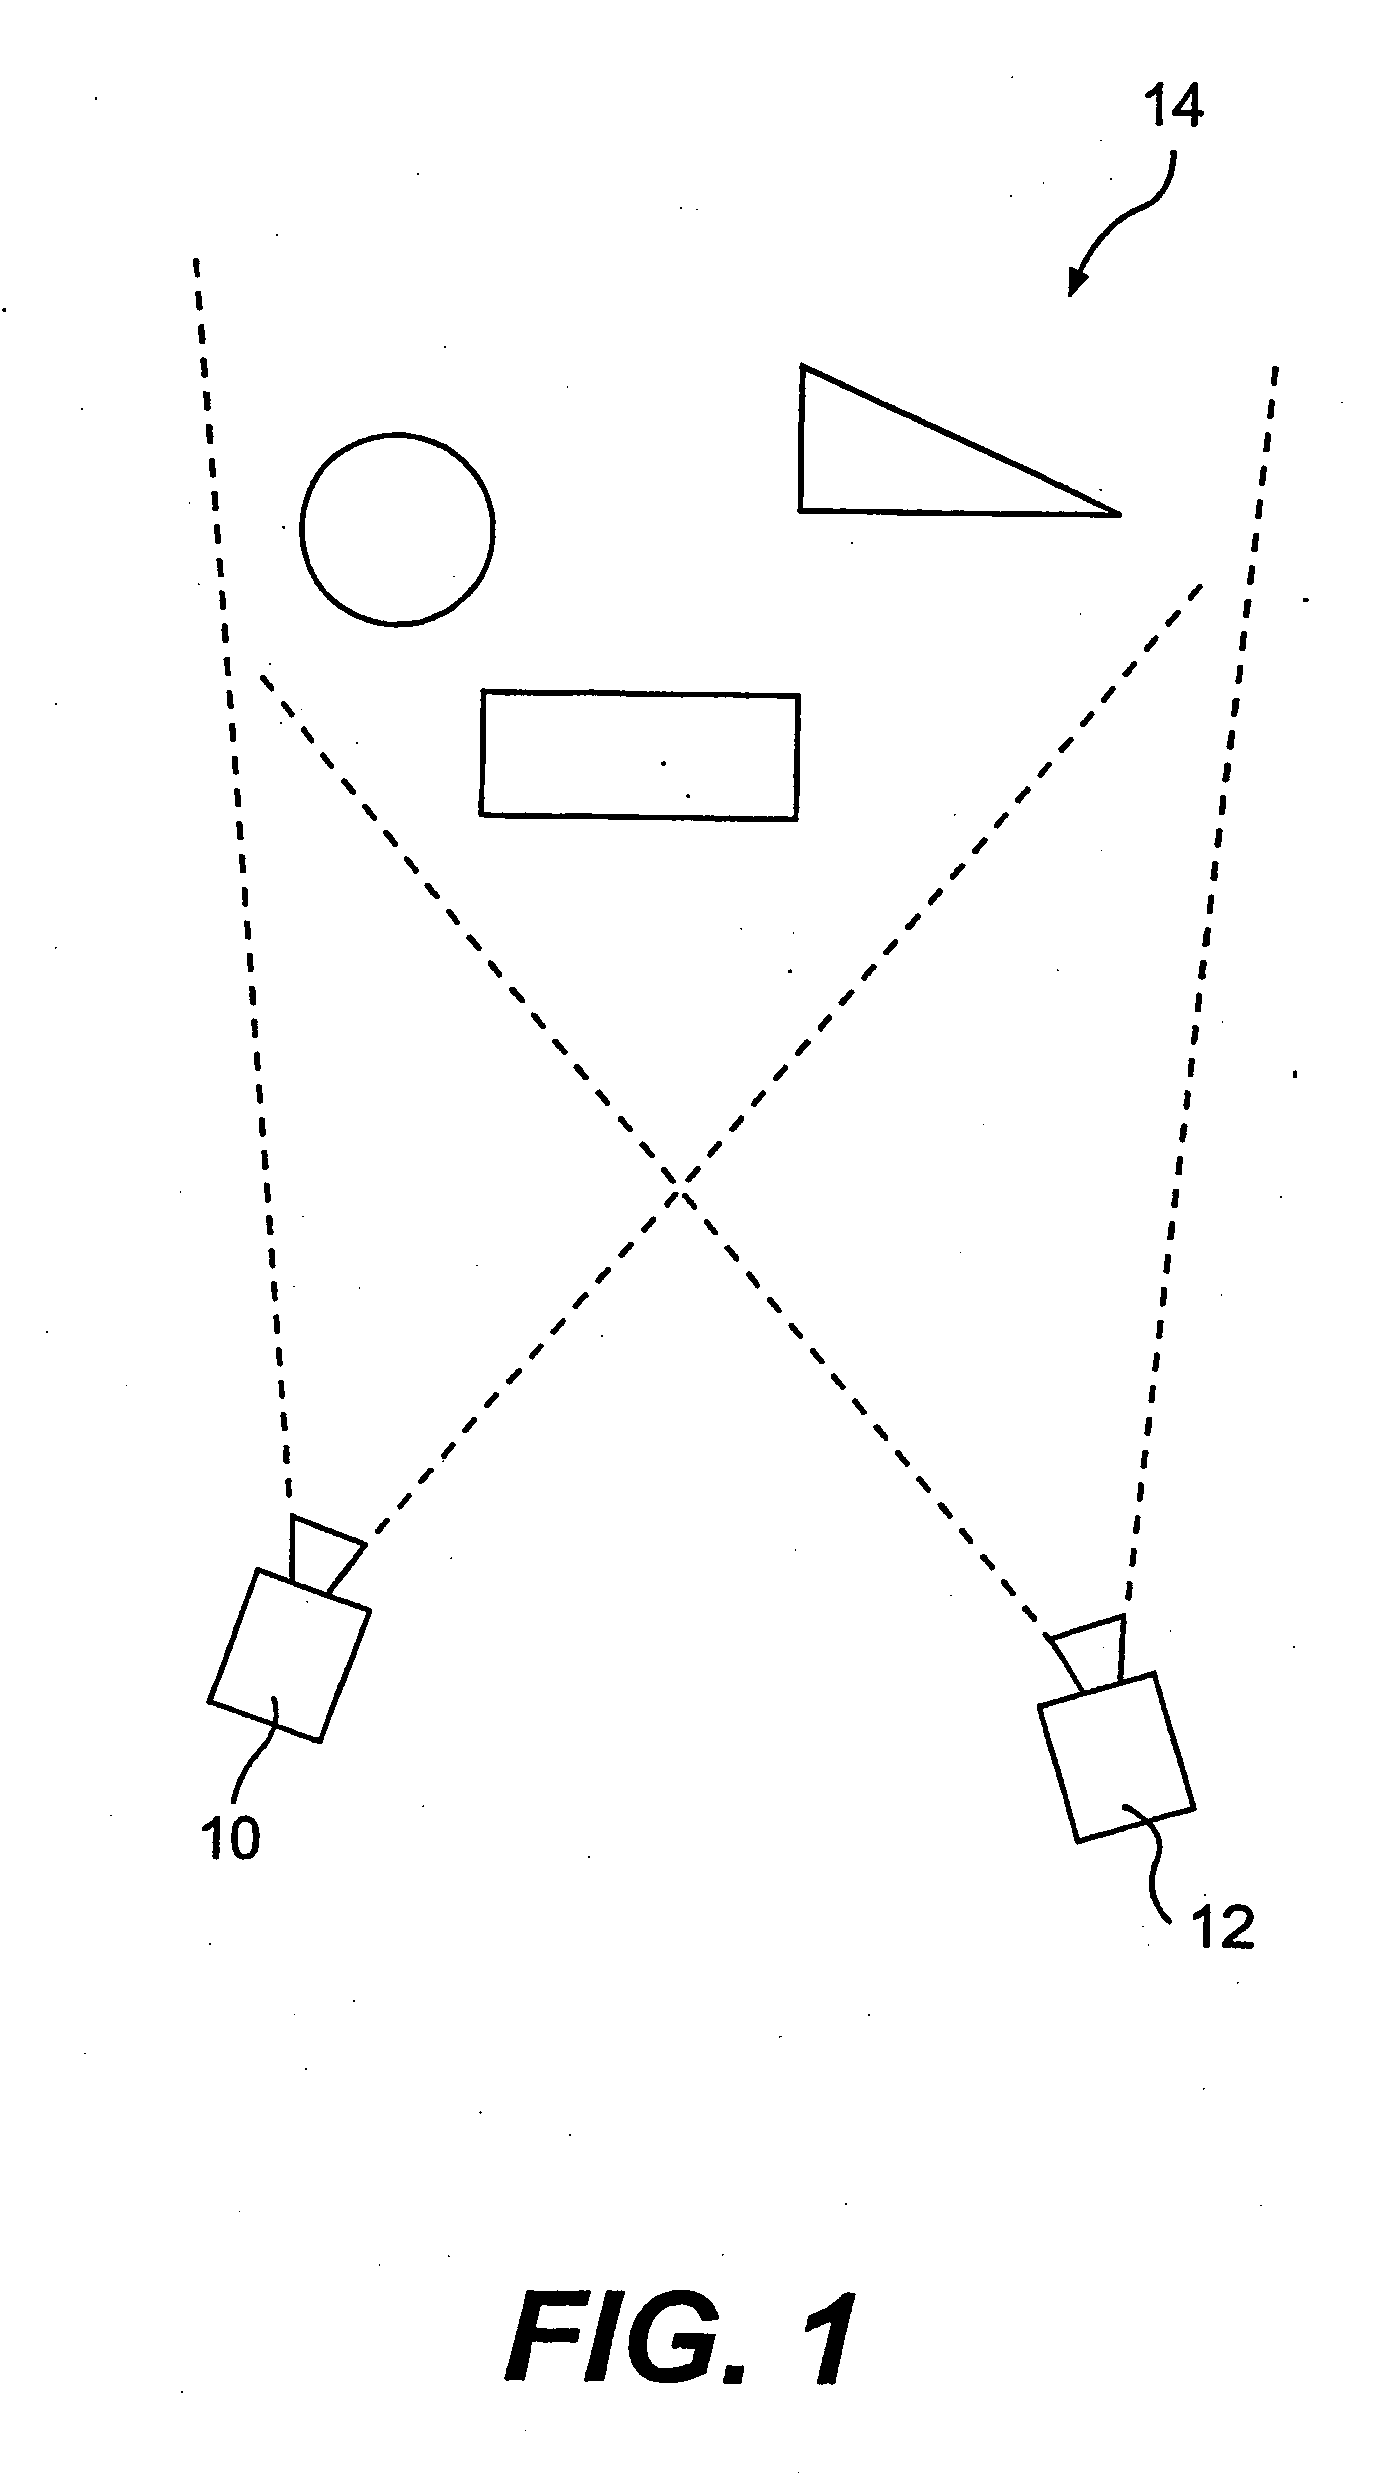 Critical alignment of parallax images for autostereoscopic display